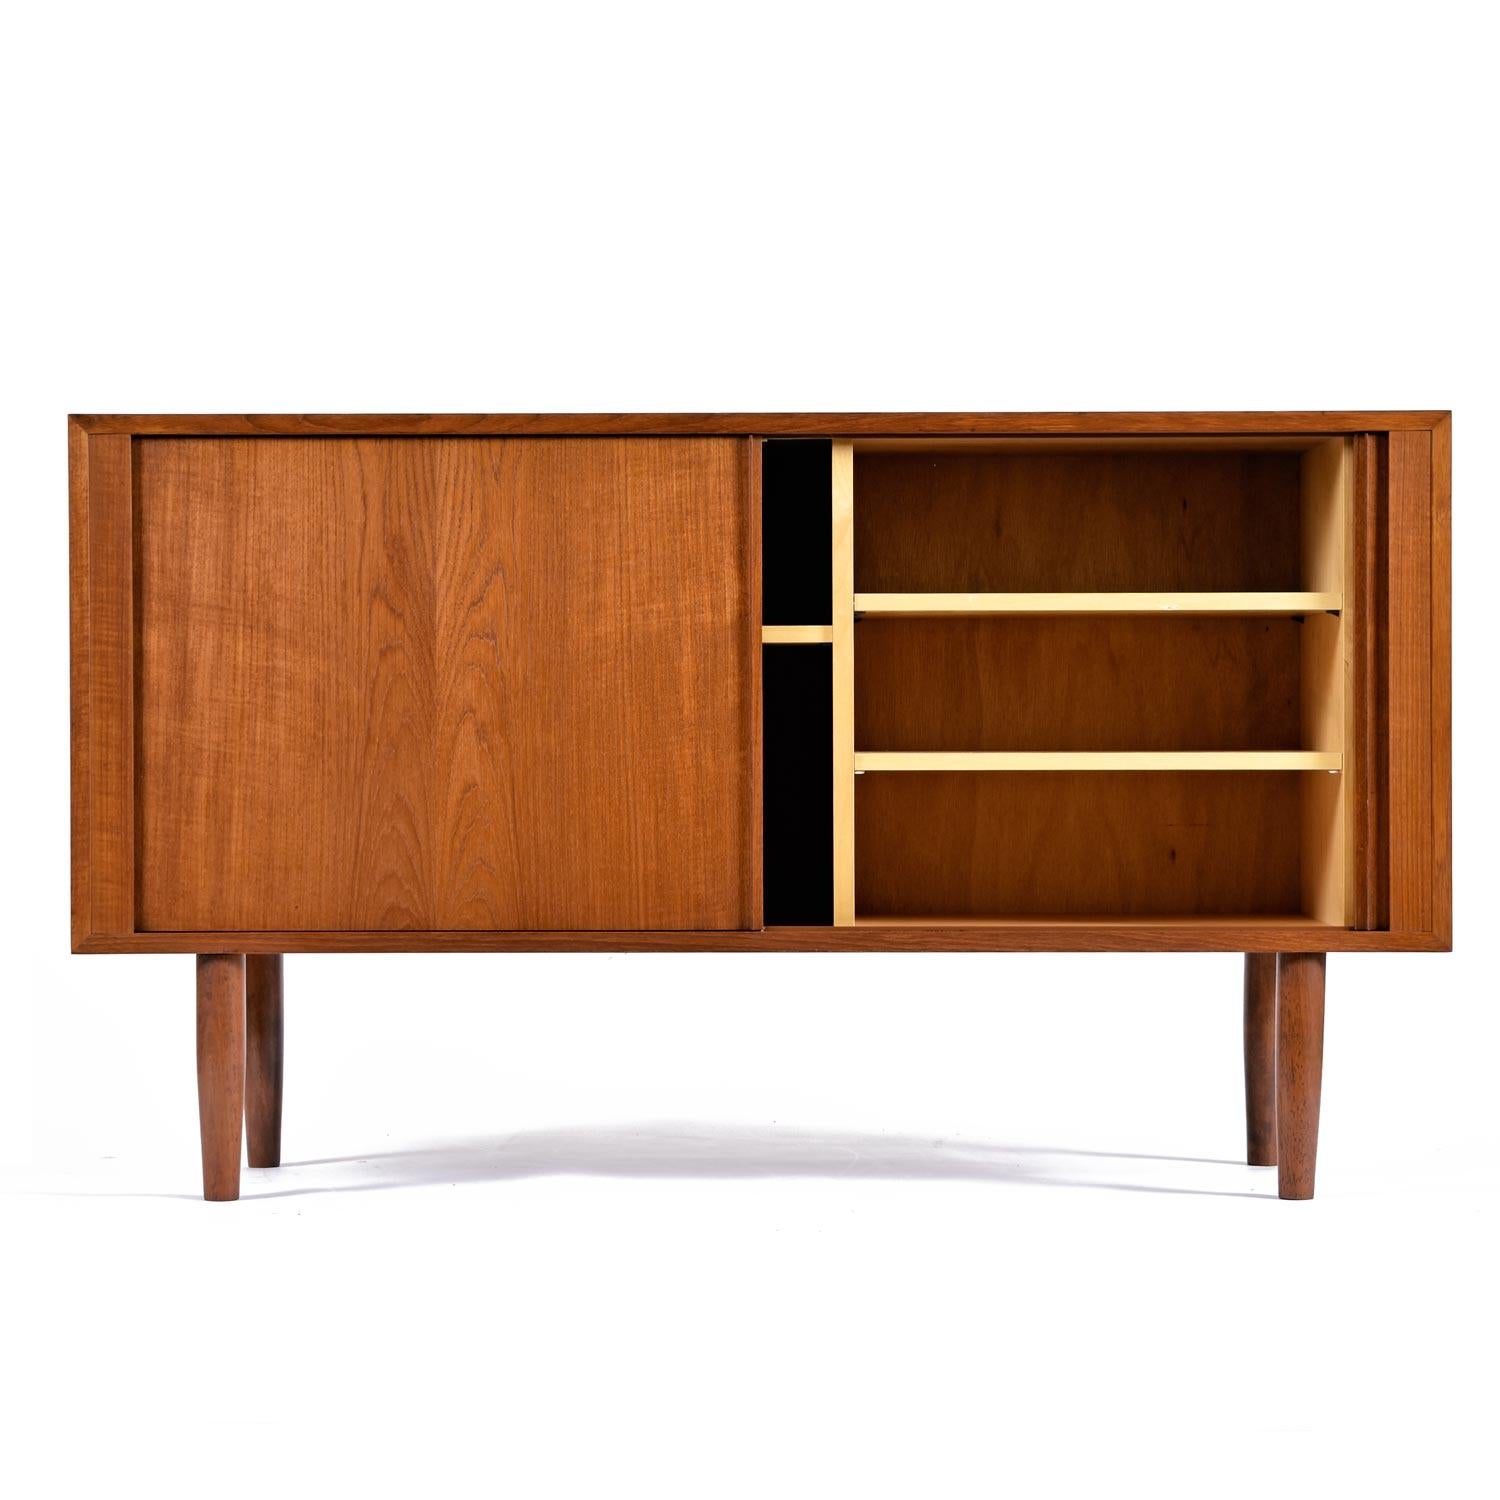 Mid-Century Modern teak credenza by Poul Hundevad. This handsome piece celebrates the elegant minimalist form of the period. Bearing the makers mark on the back left corner and 